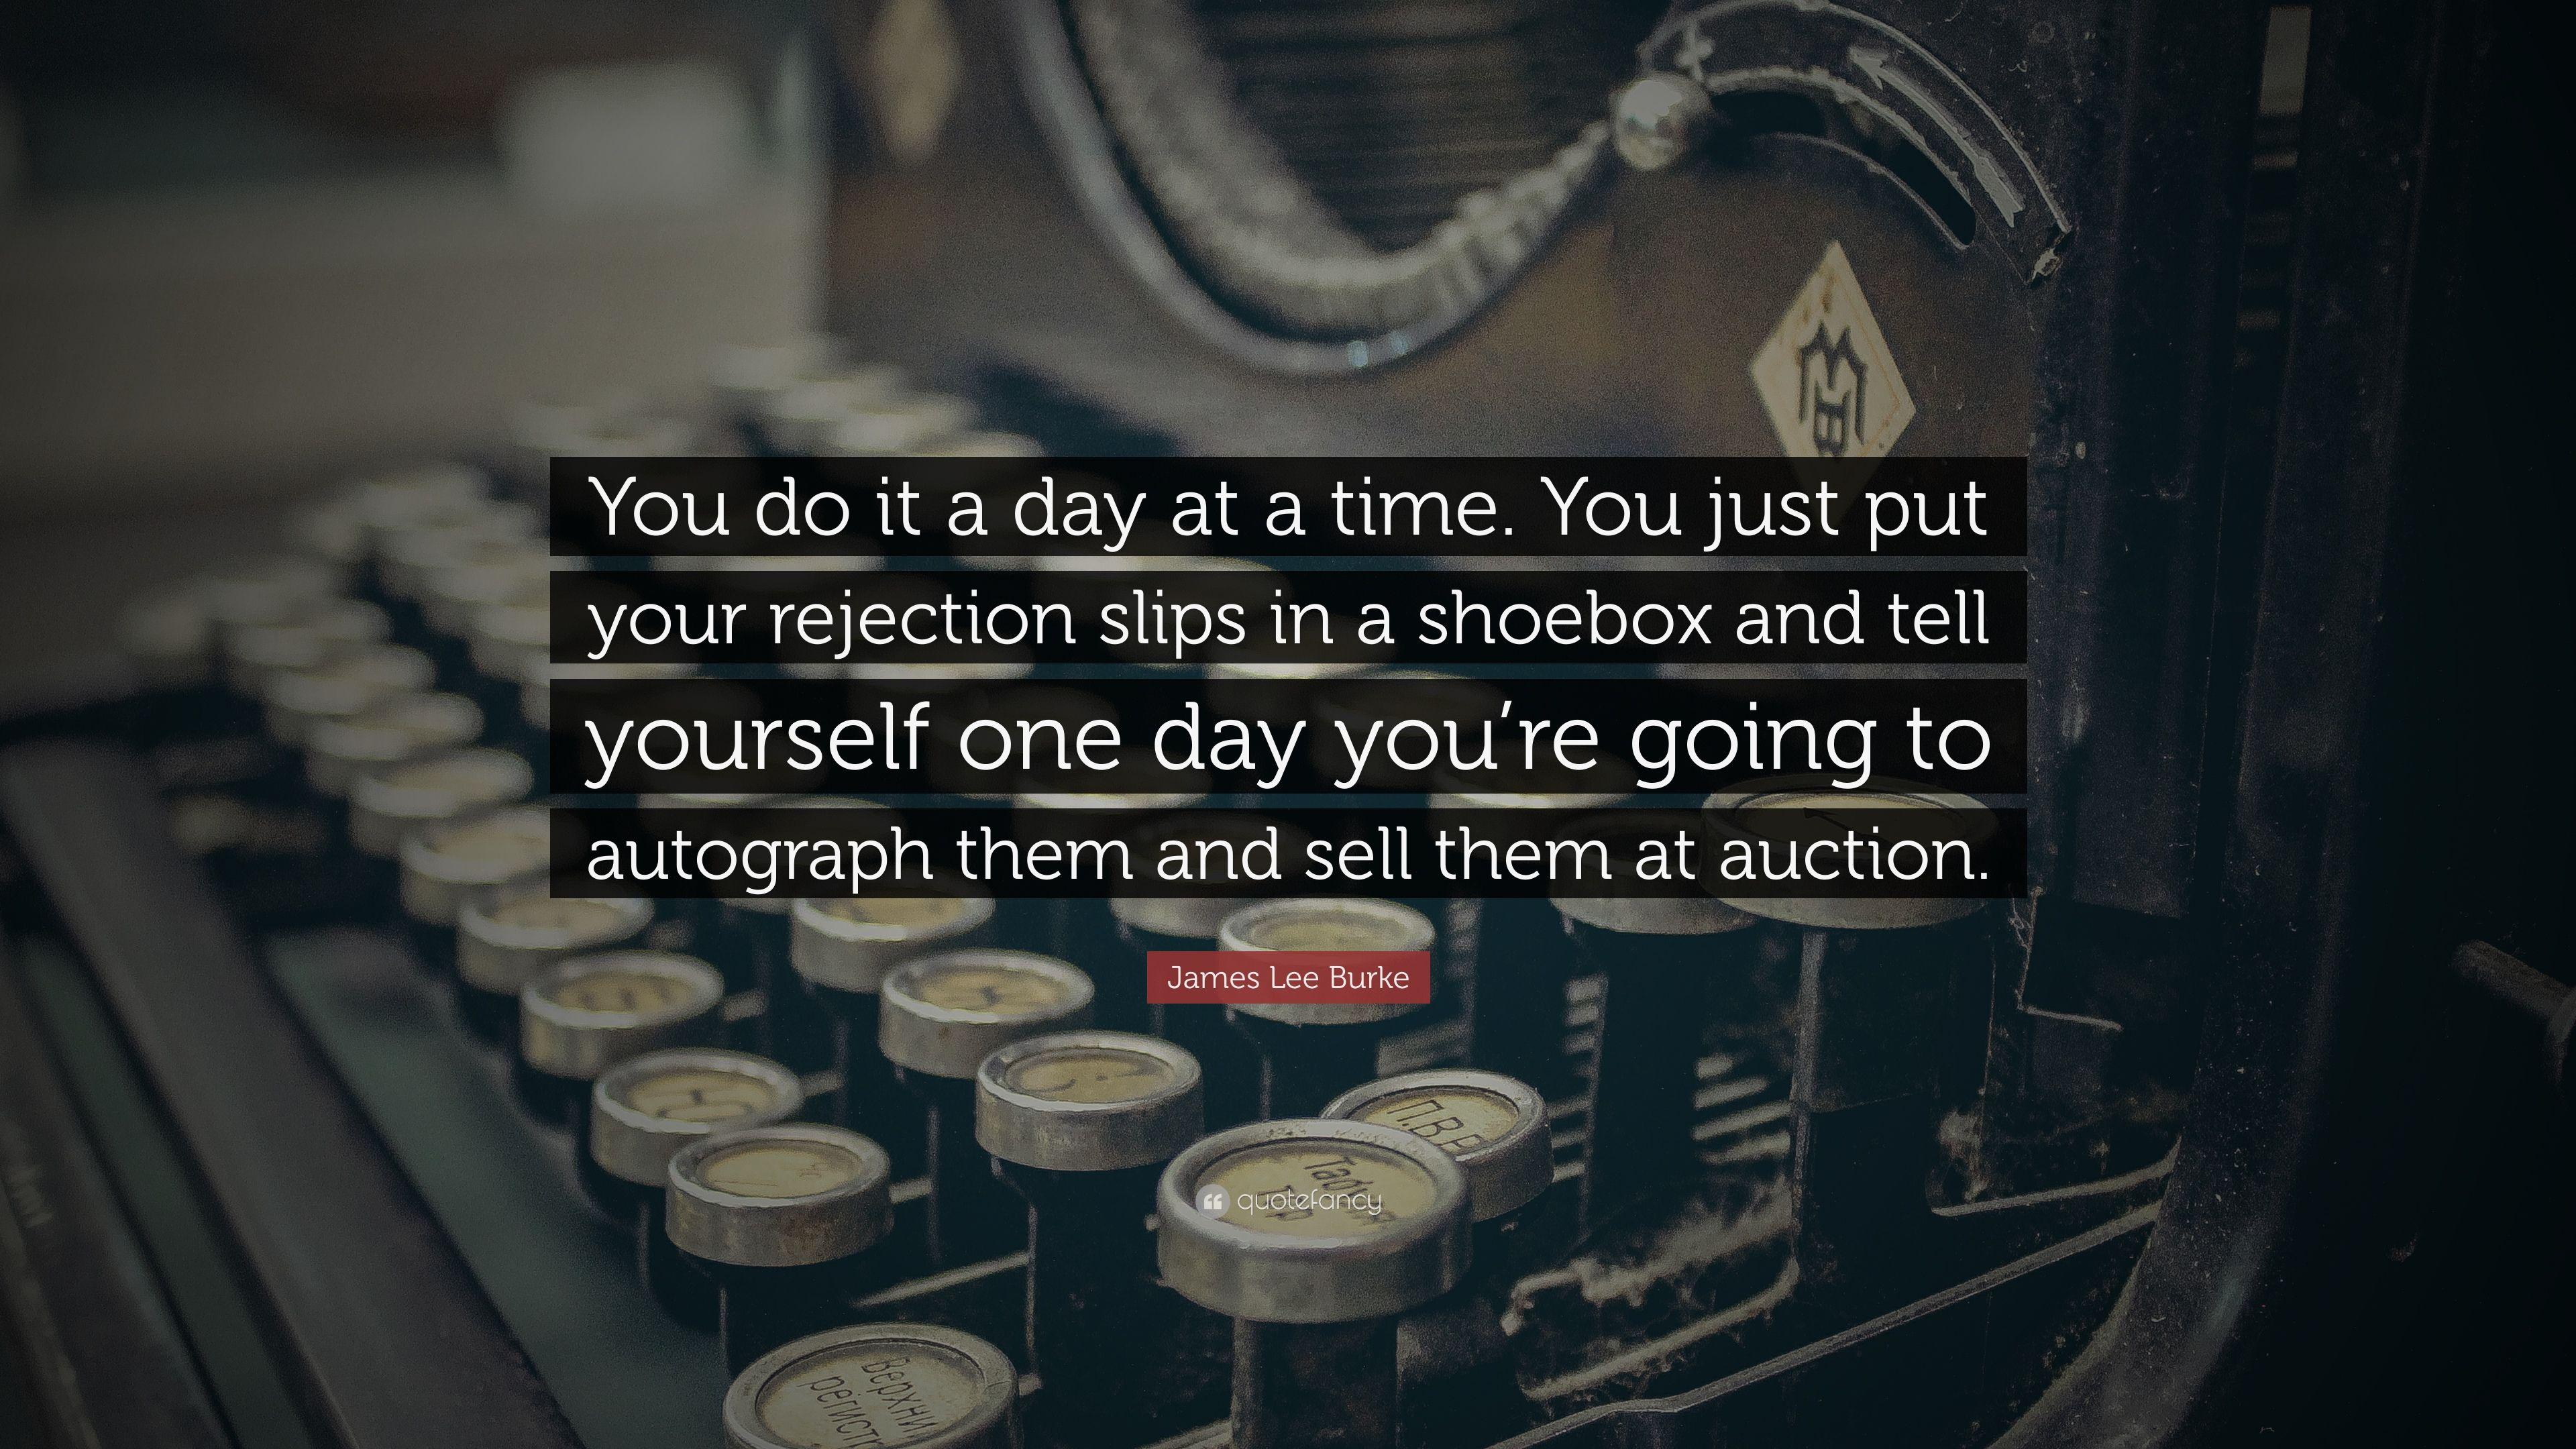 James Lee Burke Quote: “You do it a day at a time. You just put